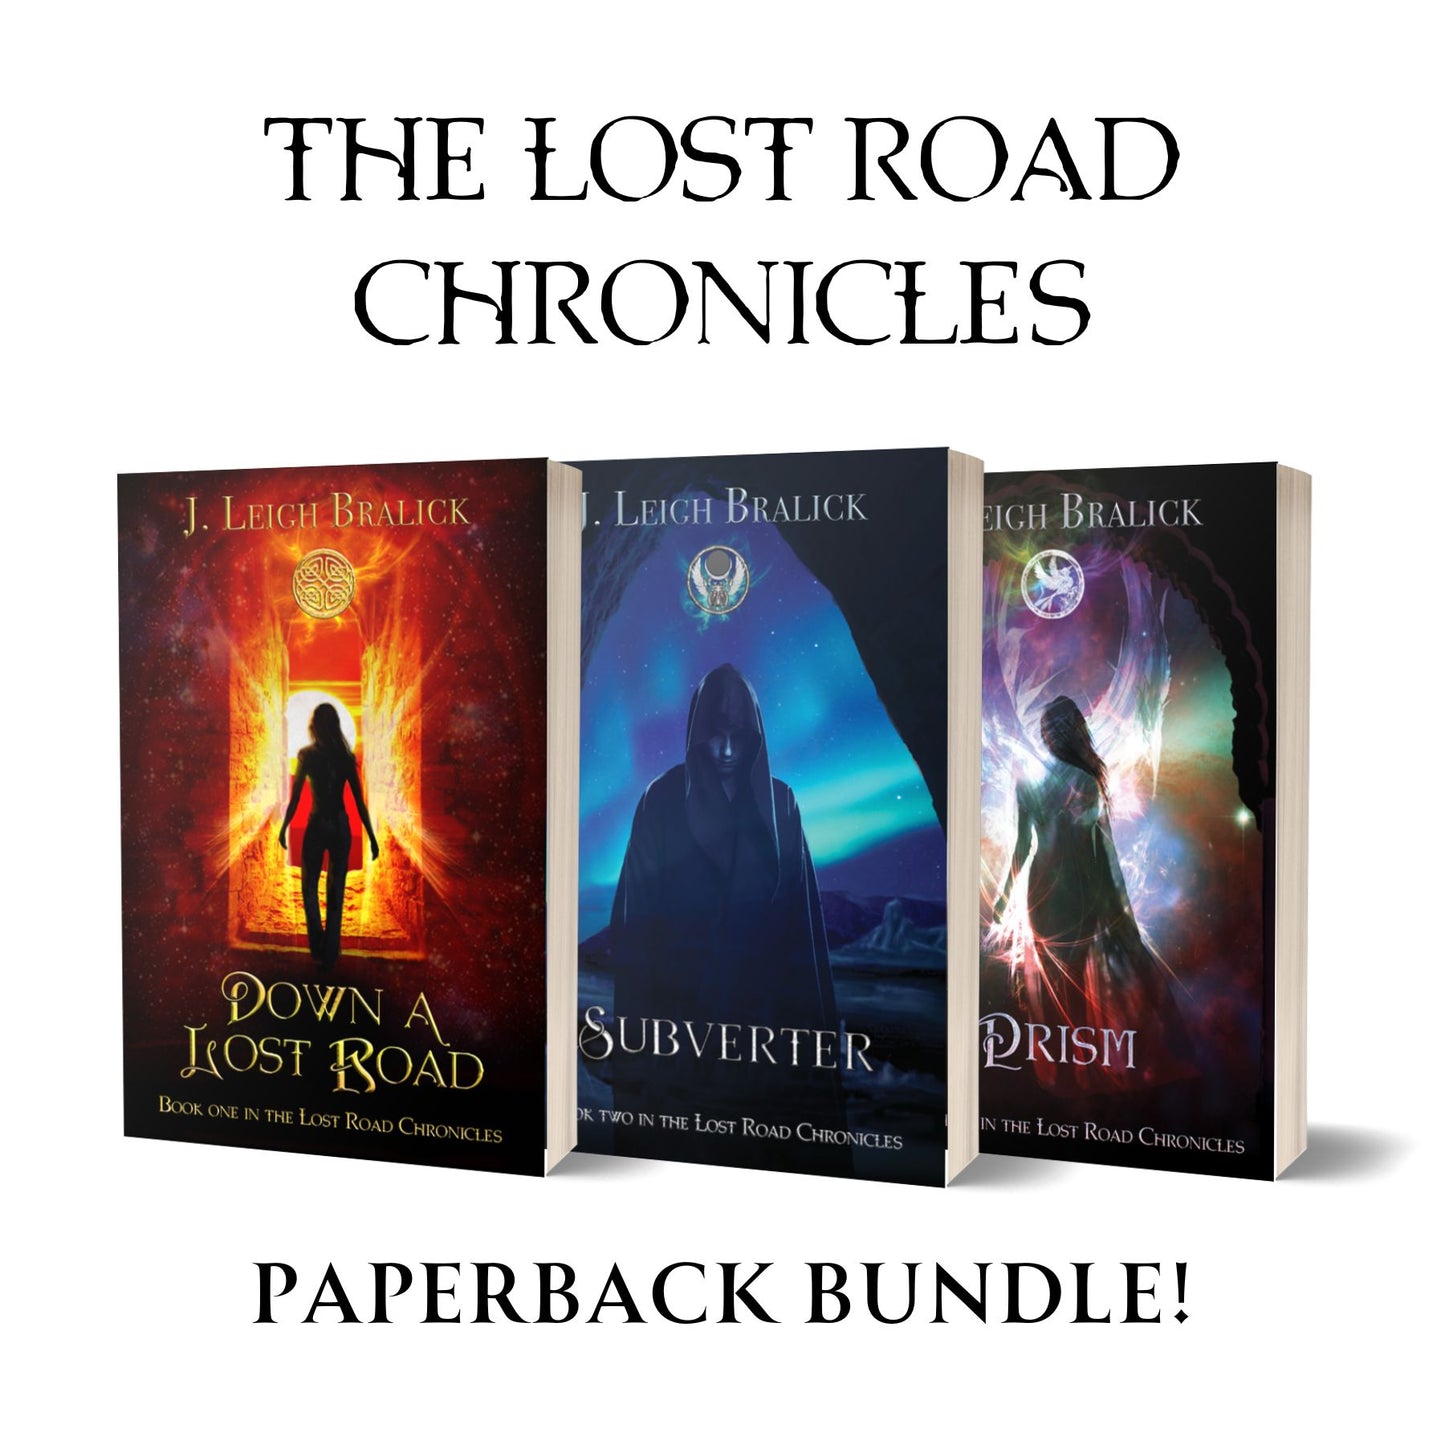 The Lost Road Chronicles Paperback Bundle